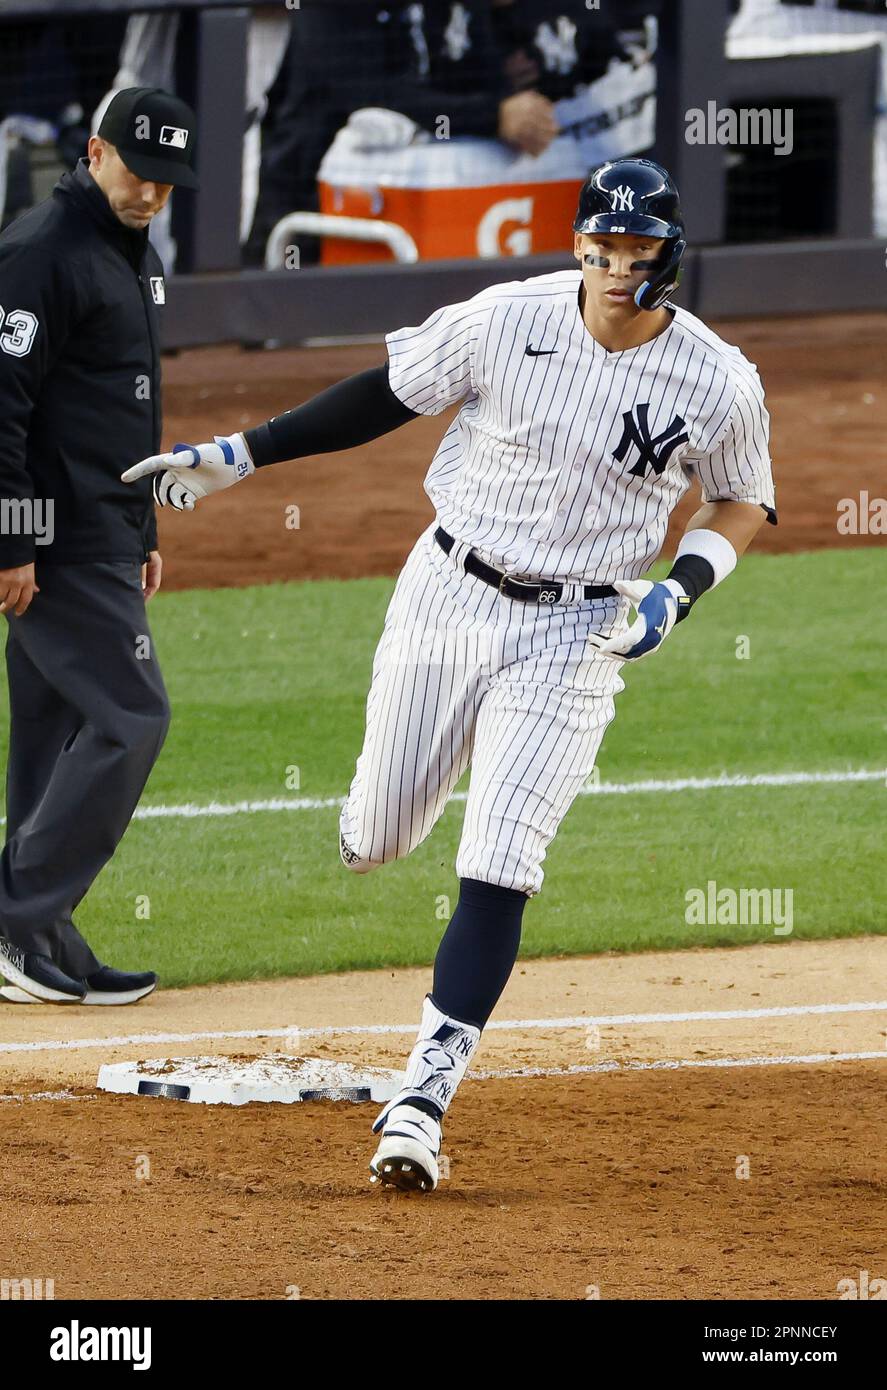 Aaron Judge of the New York Yankees rounds the bases after hitting